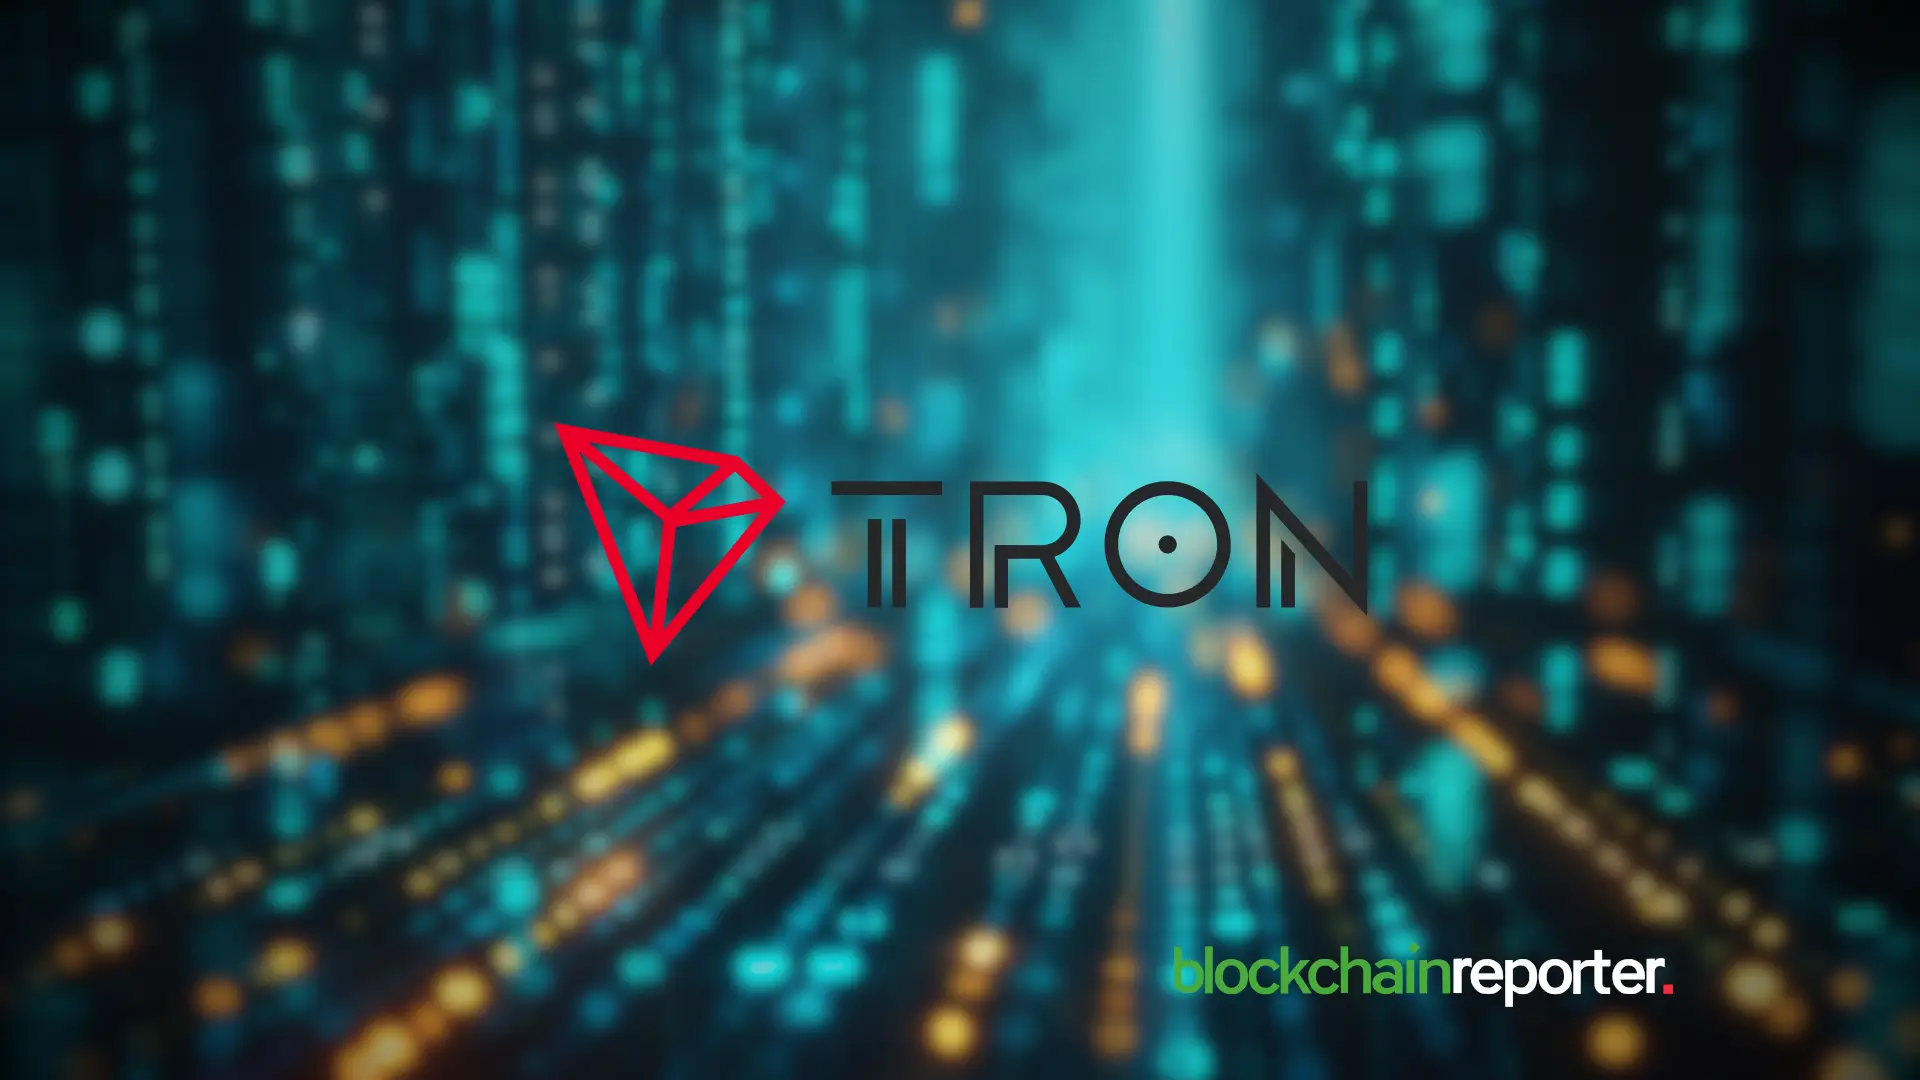 Tron Founder Justin Sun Unveils Gas-Free Stablecoin Transfers